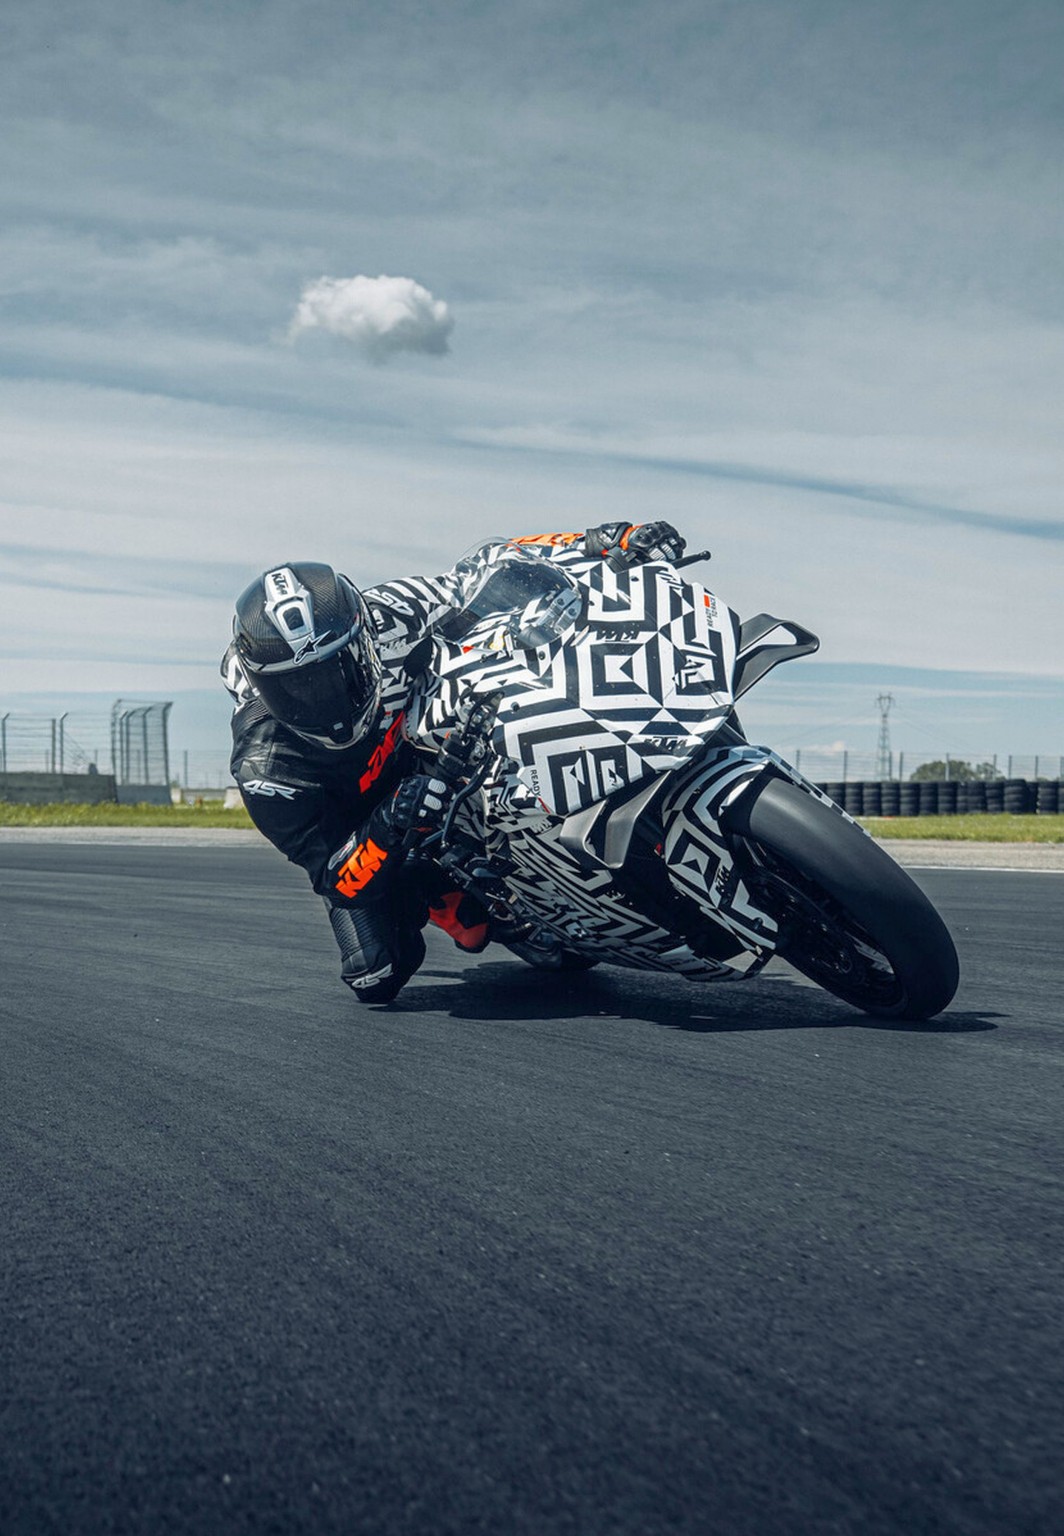 KTM 990 RC R - finally the thoroughbred sports bike for the road! - Image 18